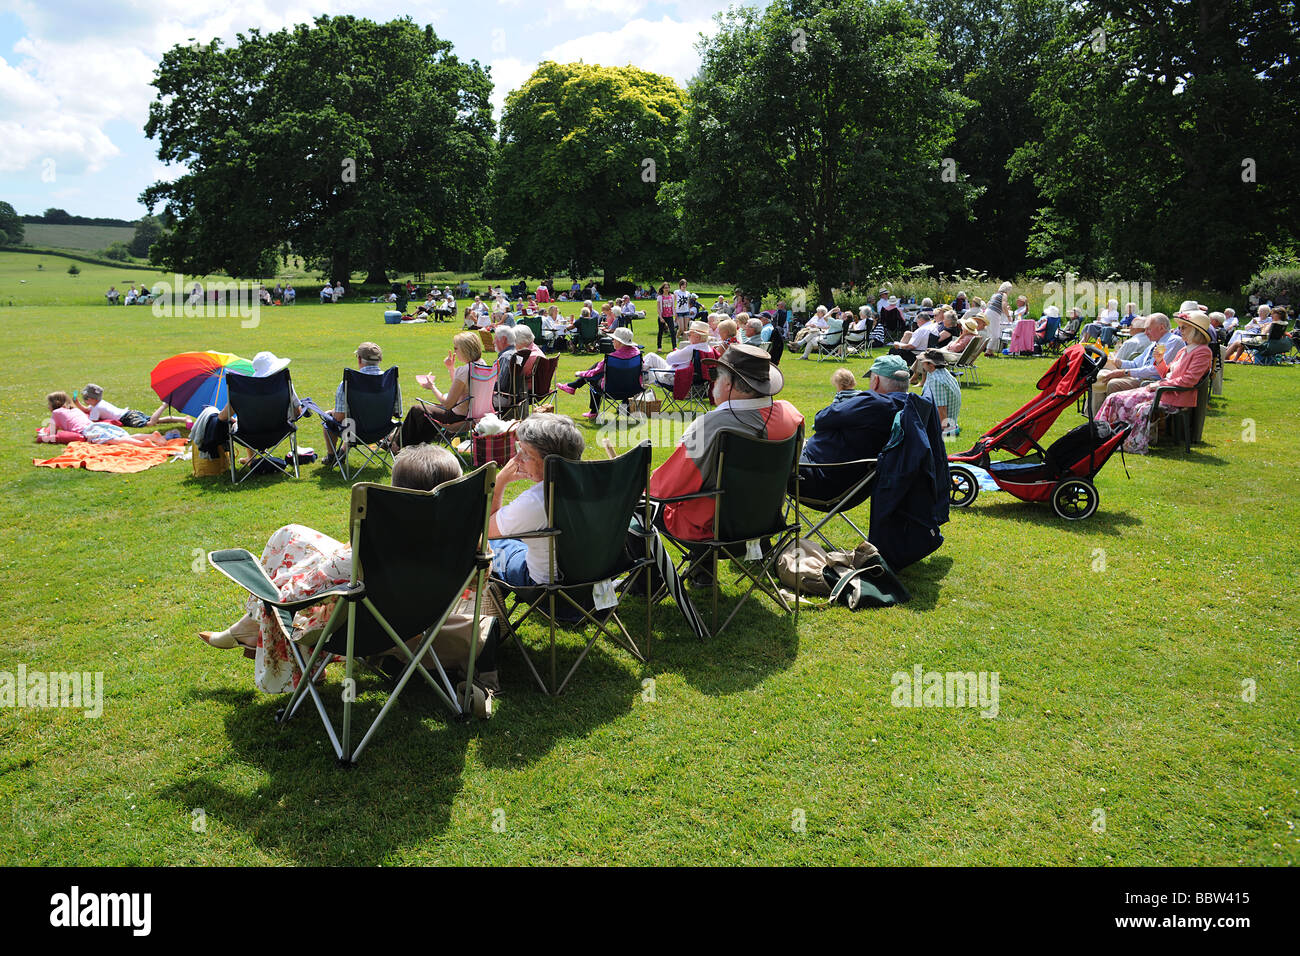 Crowd audience with picnic on a lawn in West Country England in the summer sun Stock Photo